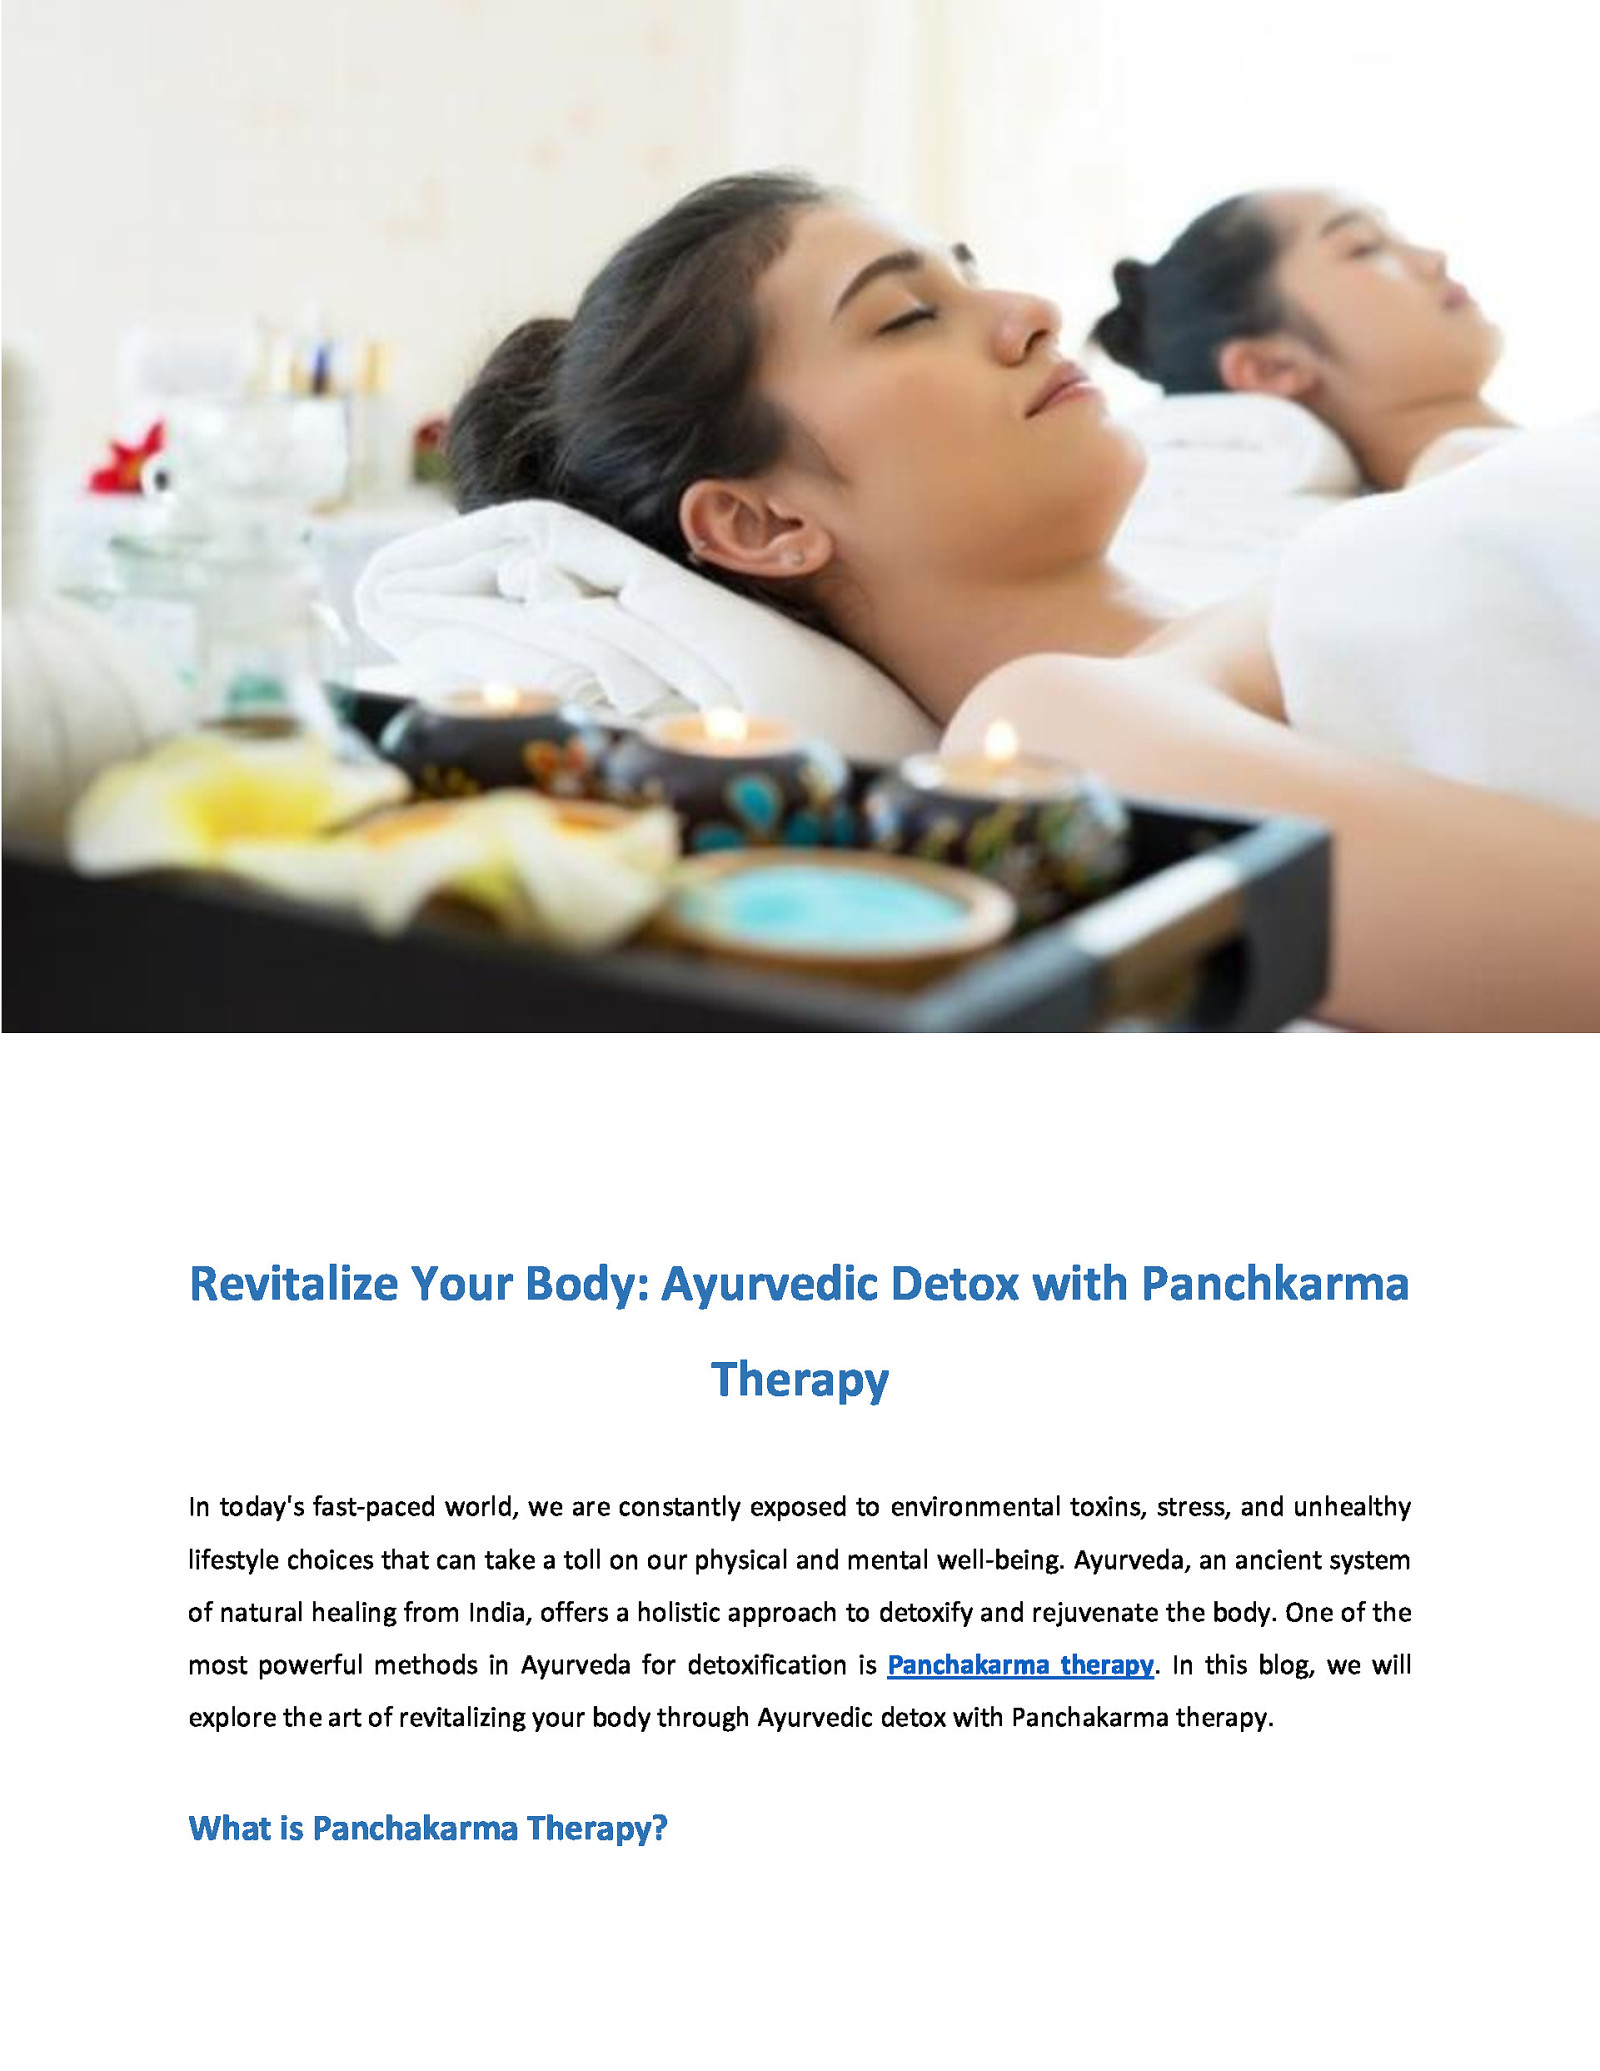 Revitalize Your Body: Ayurvedic Detox with Panchkarma Therapy